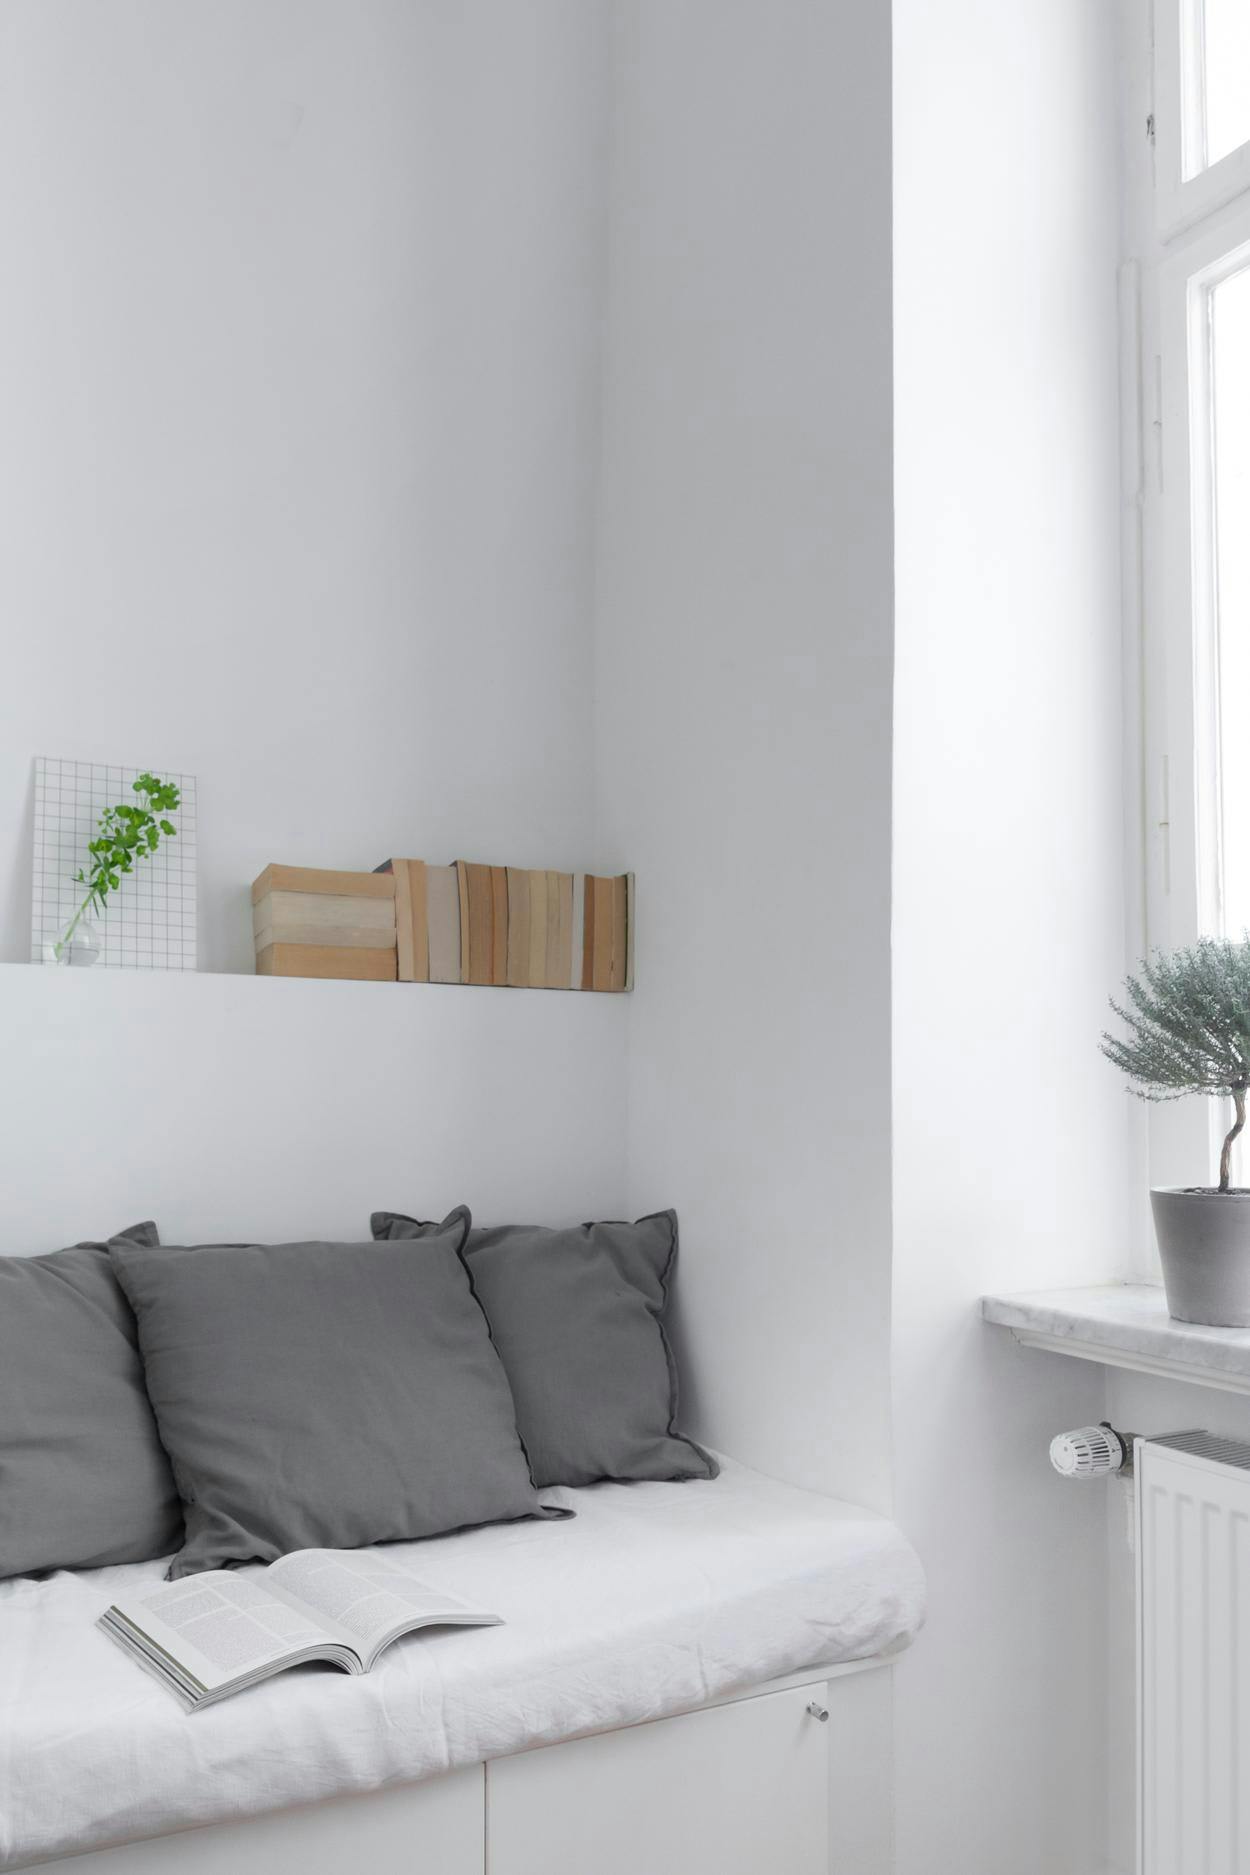 A white bench is placed in a room with a window, and a potted plant is placed next to it.